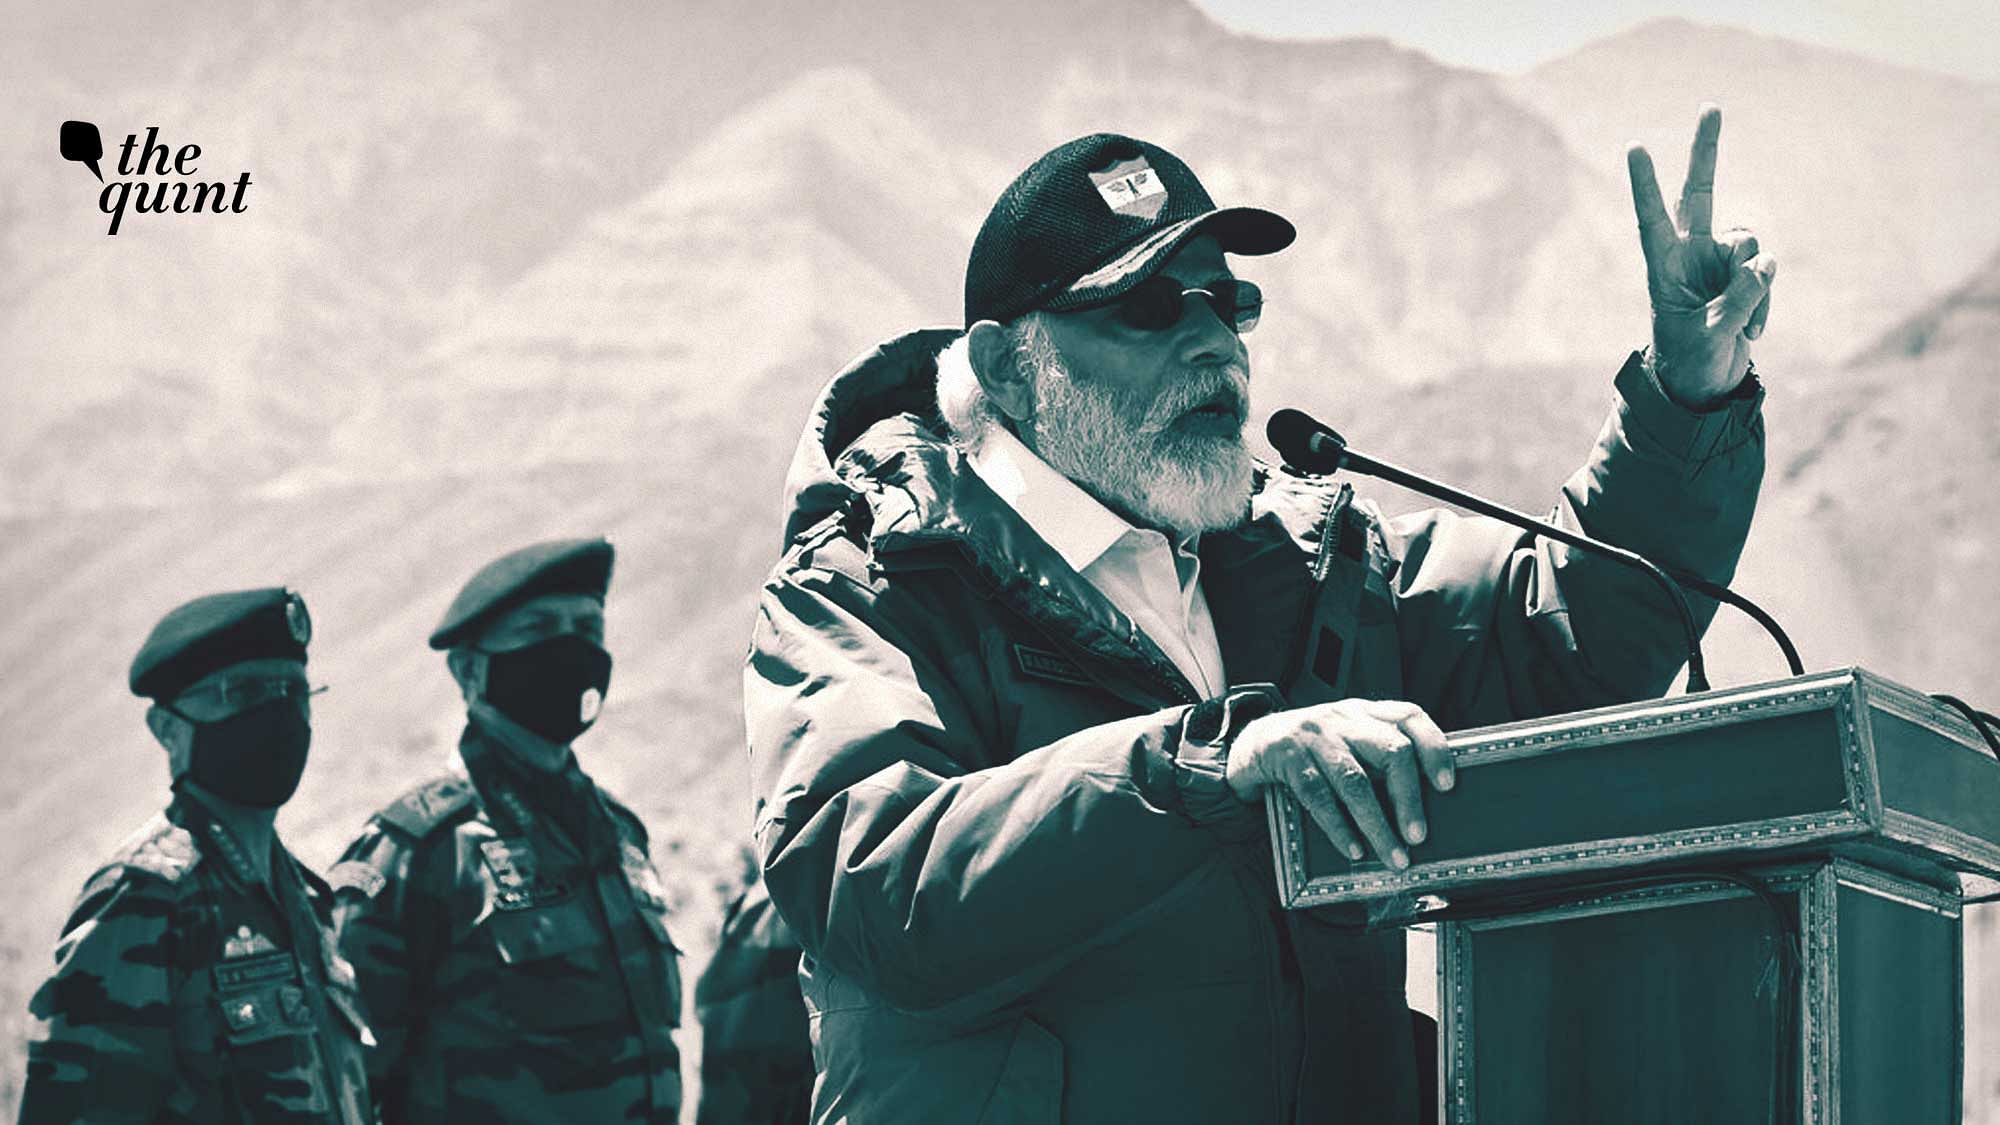 Altered image of PM Narendra Modi addressing soldiers during a visit to Nimu, Ladakh area, Friday, July 3, 2020.